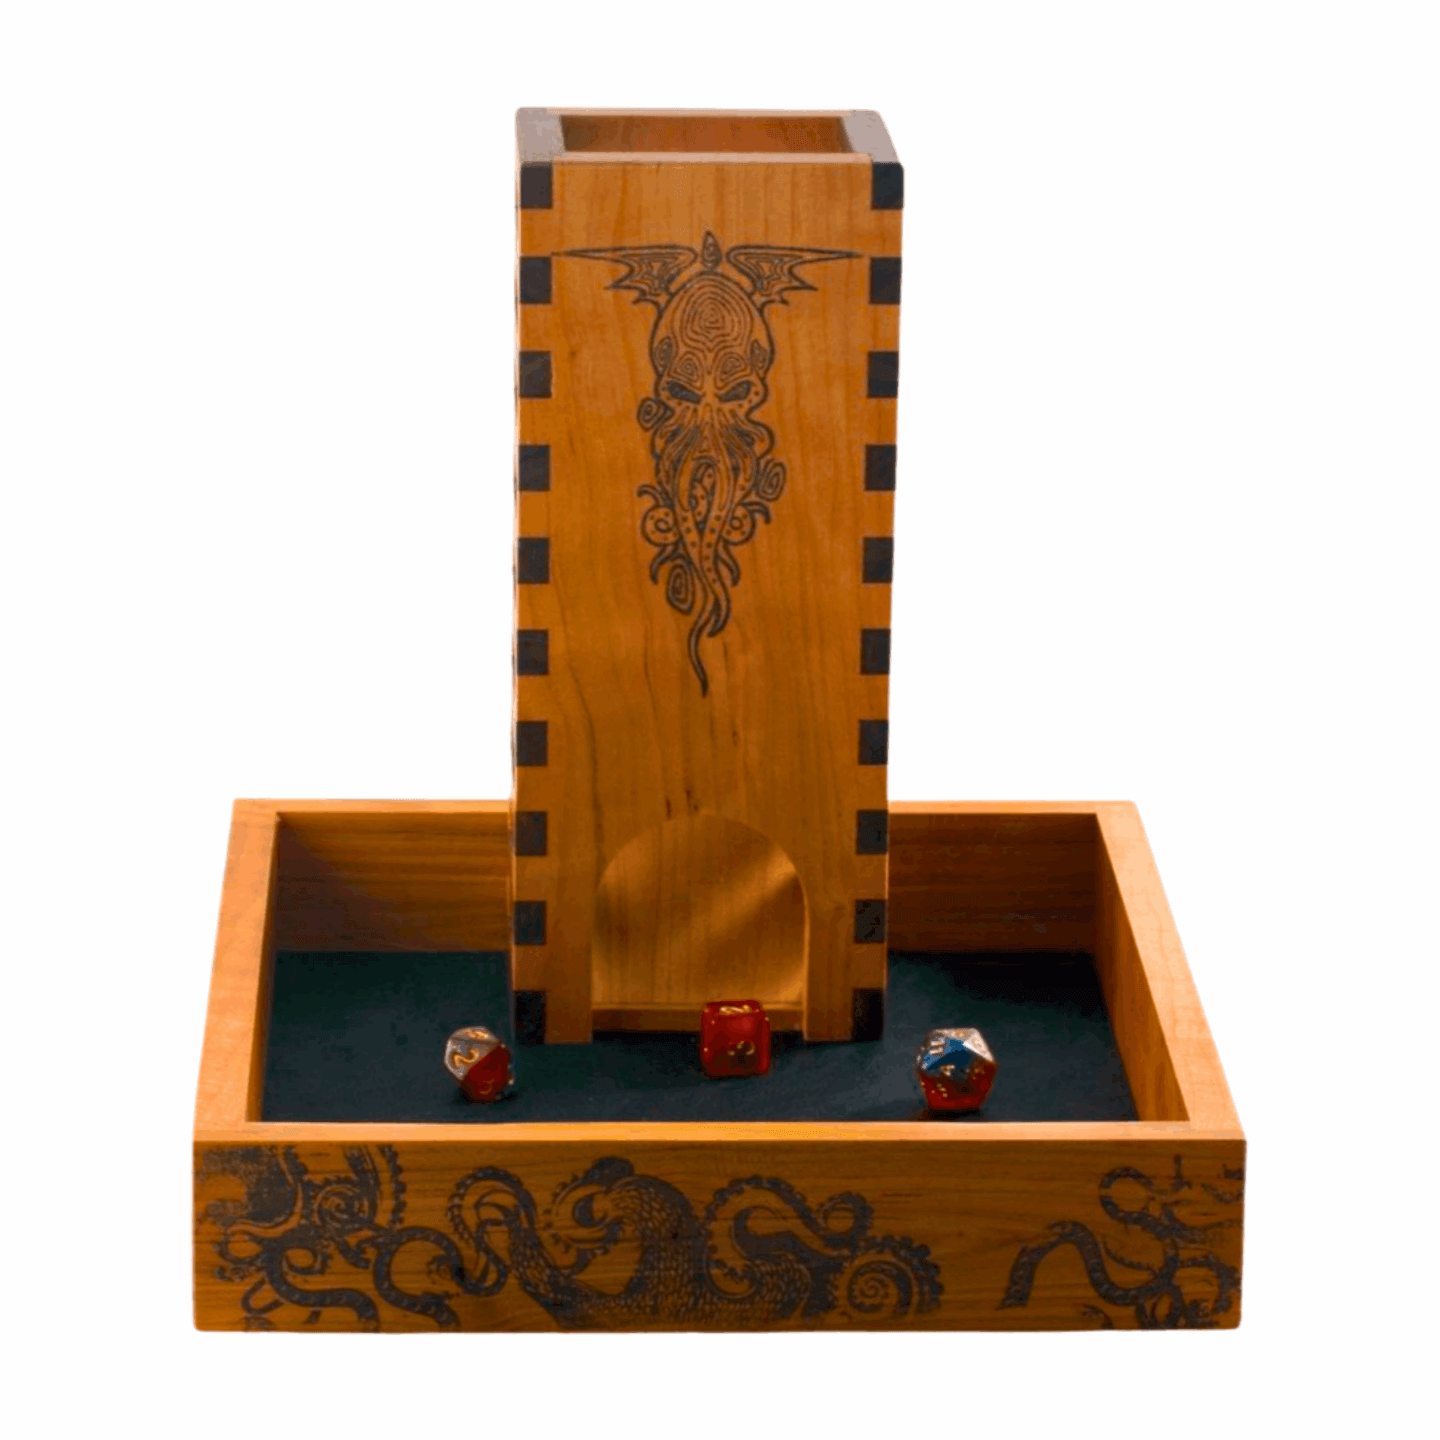 Wooden Cthulhu Dice Roller in Dice Tray with Tentacle Design and 3 Dice